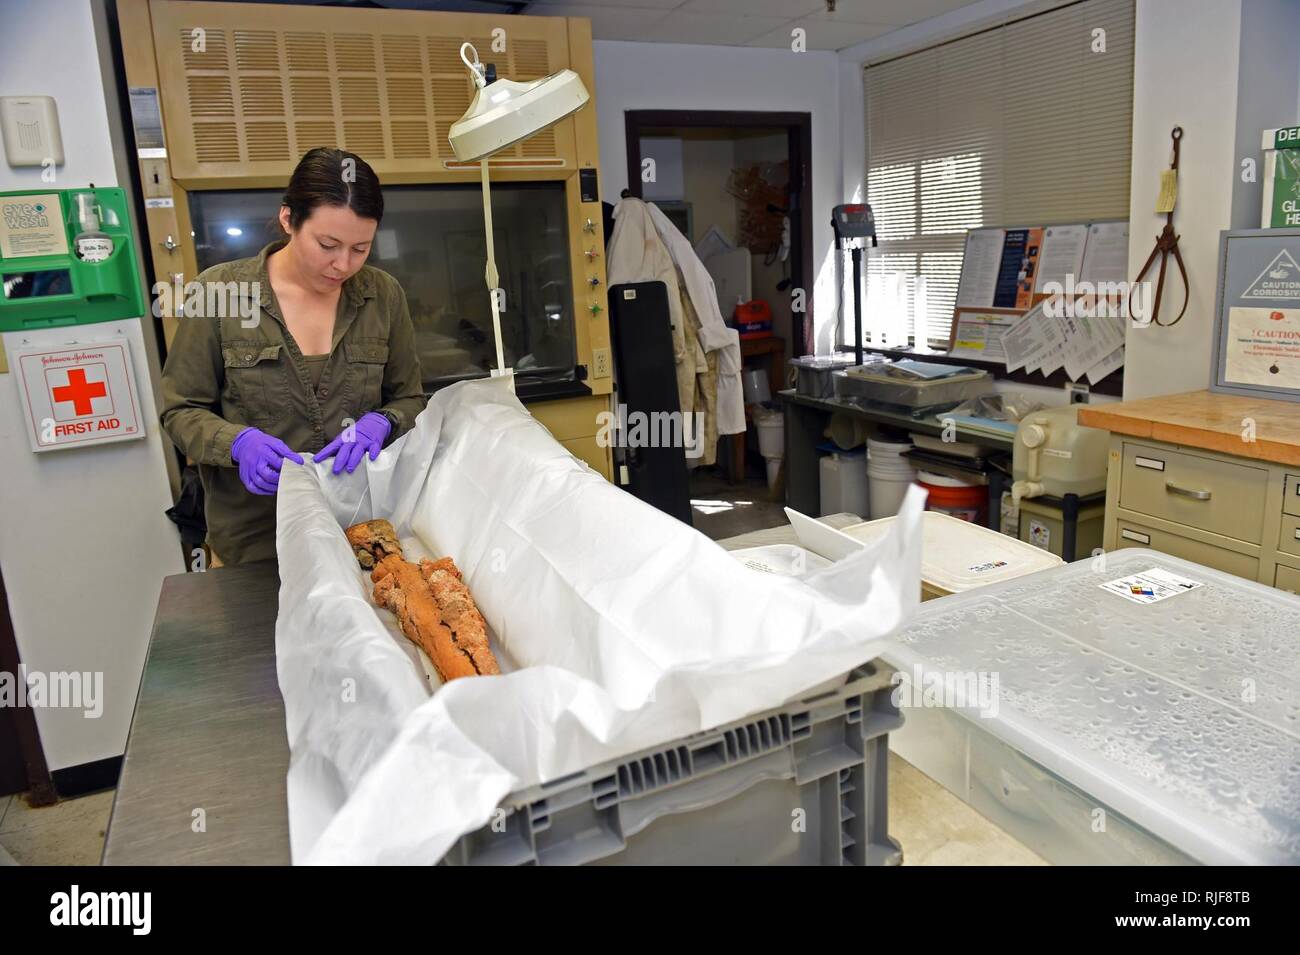 WASHINGTON (Aug. 17, 2016) Kate Morrand, an archaeological conservator at Naval History and Heritage Command’s (NHHC) Underwater Archaeology Branch, displays an M1 Garand rifle used by U.S. Marine Corps Raiders during the World War II attack on Japanese military forces on Makin Island. Due to the rifle’s significant surface concretions, corrosion and other physical damage, NHHC Underwater Archaeology Branch is performing an assessment of the artifacts stability. Stock Photo